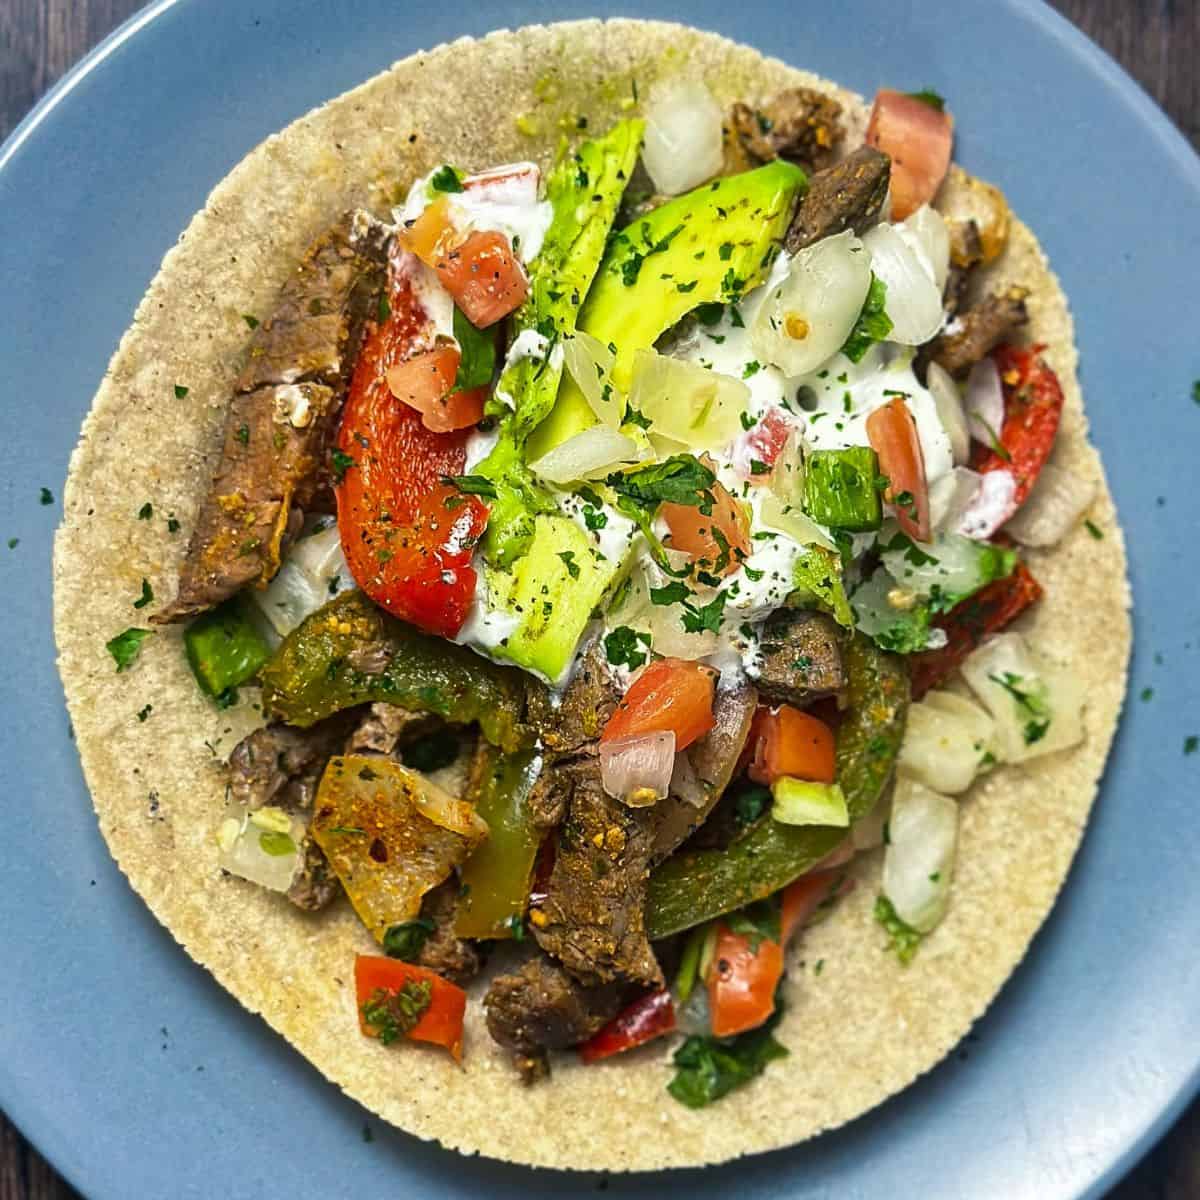 A gluten-free tortilla loaded with seasoned steak, sautéed peppers, onions, and topped with fresh pico de gallo and avocado slices.